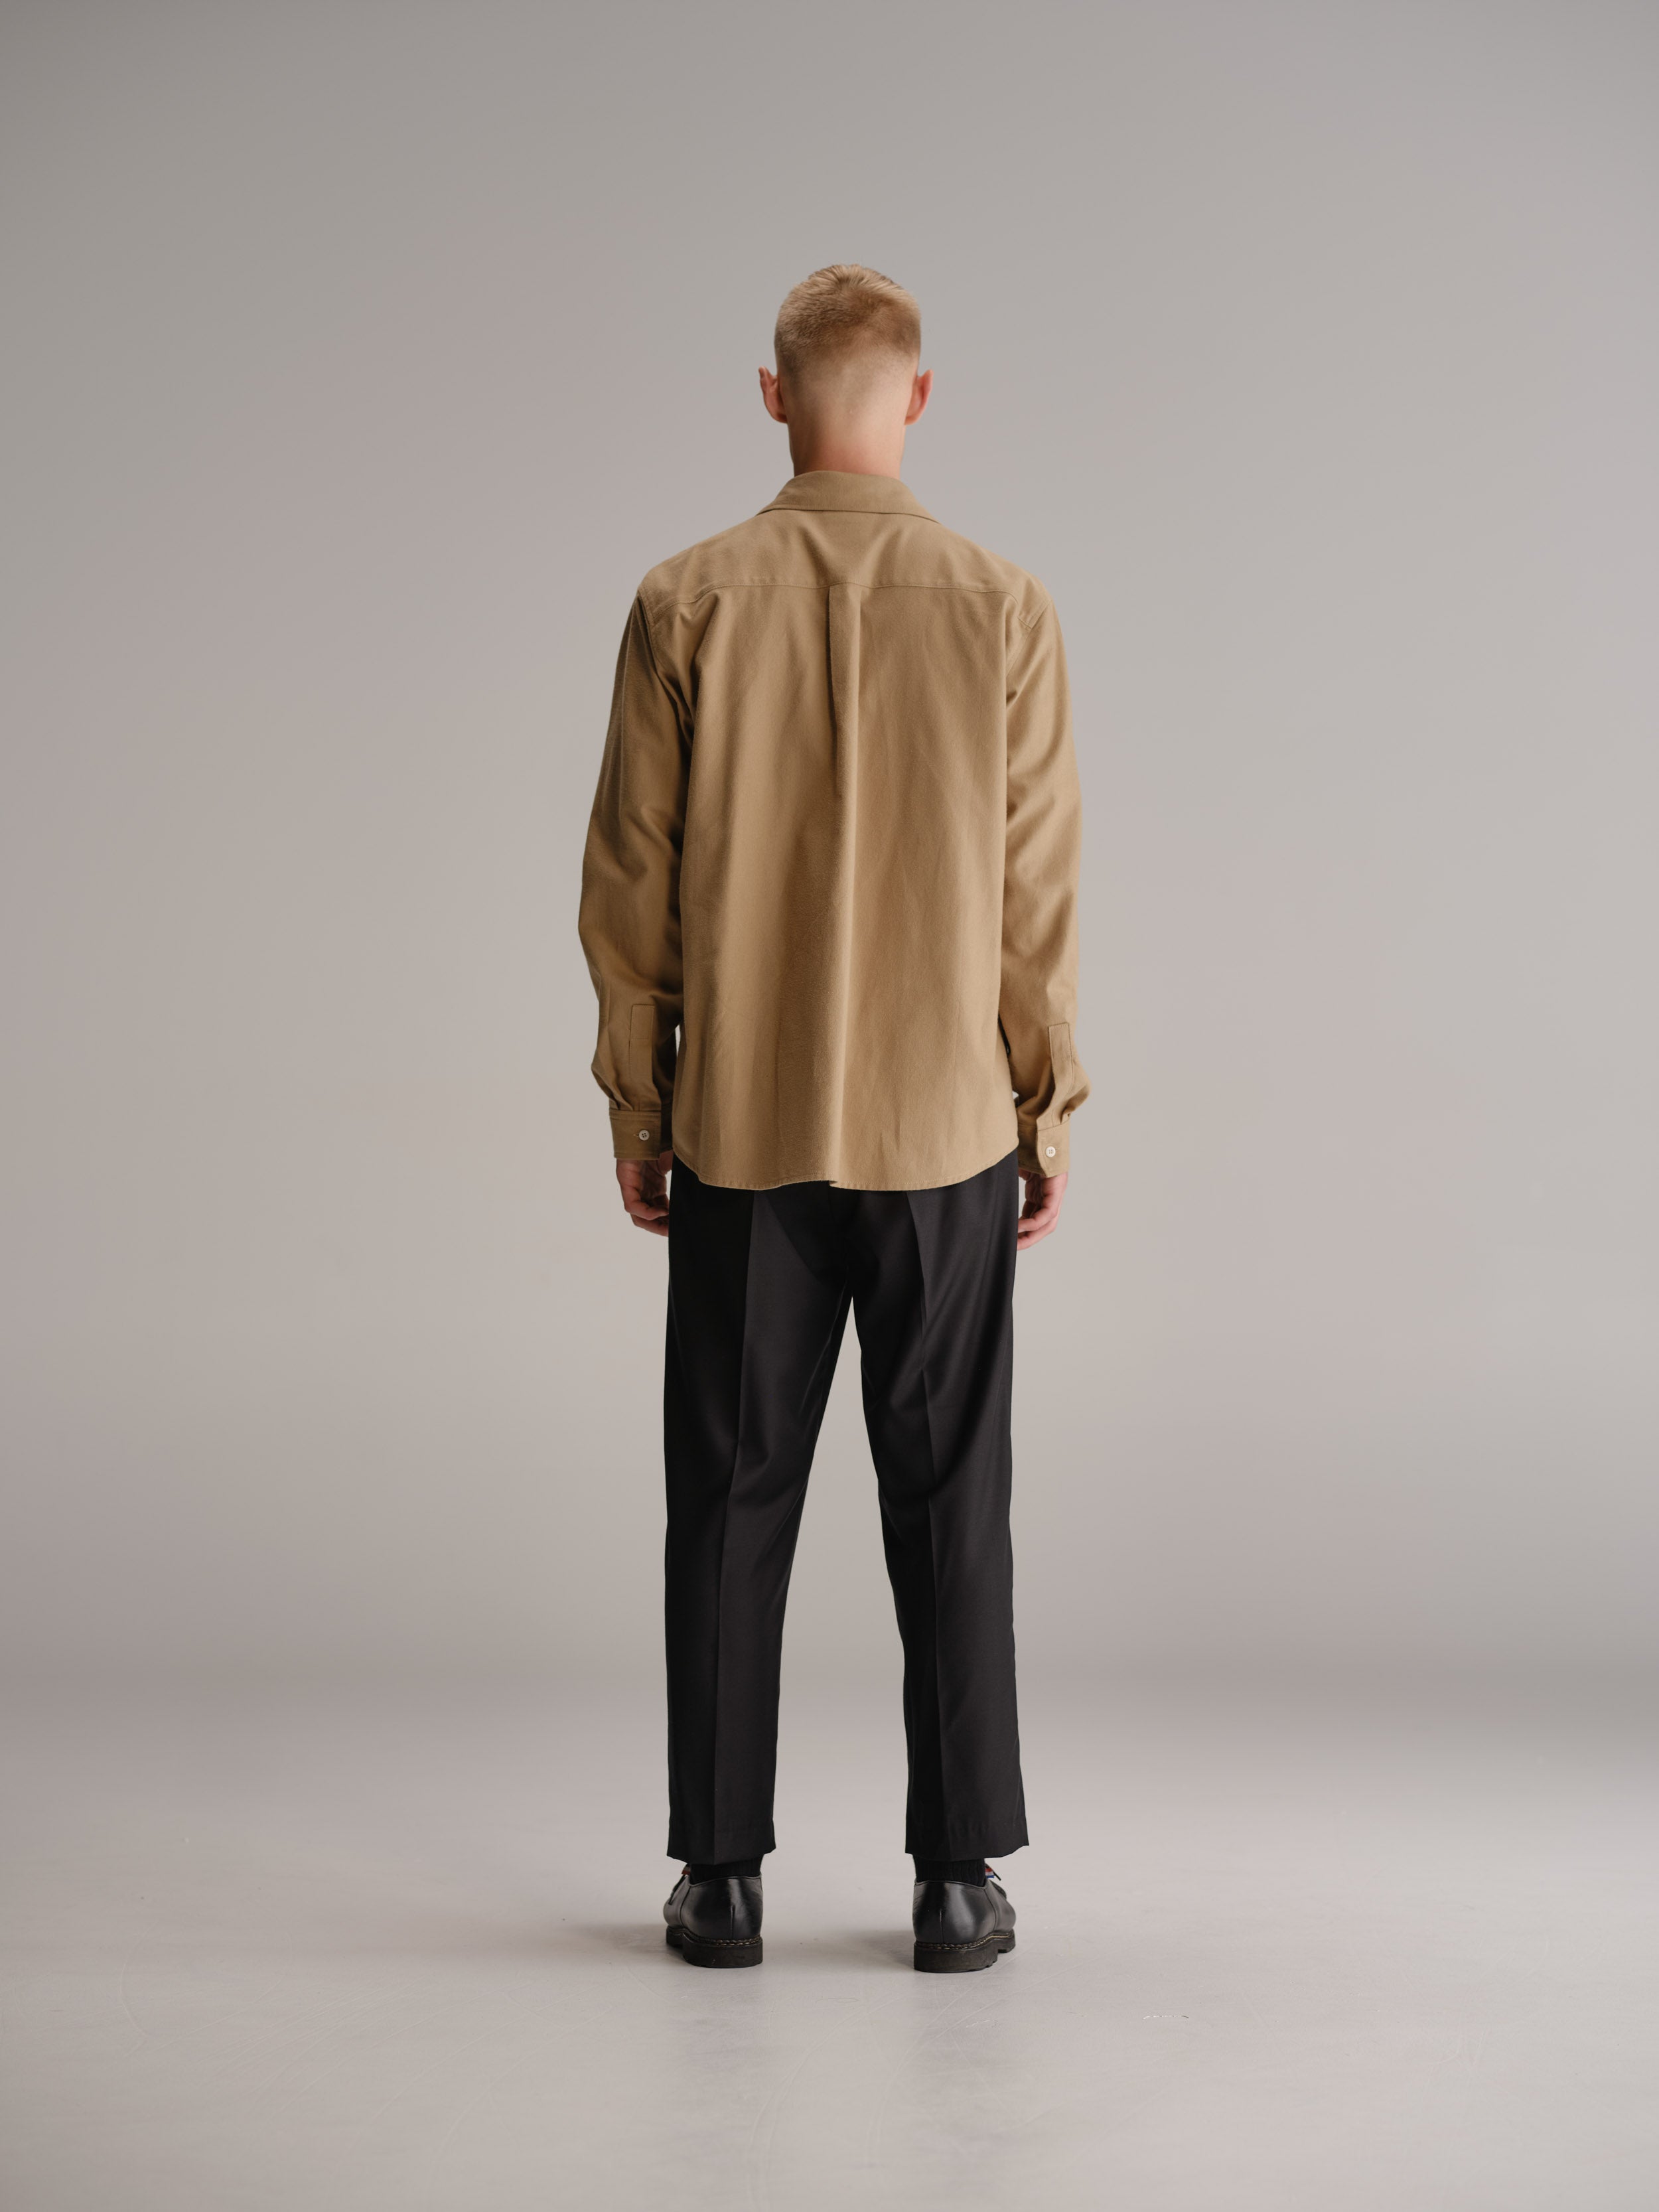 Back view of man standing in white studio wearing fawn shirt, tucked in white t-shirt and black wool trouser.